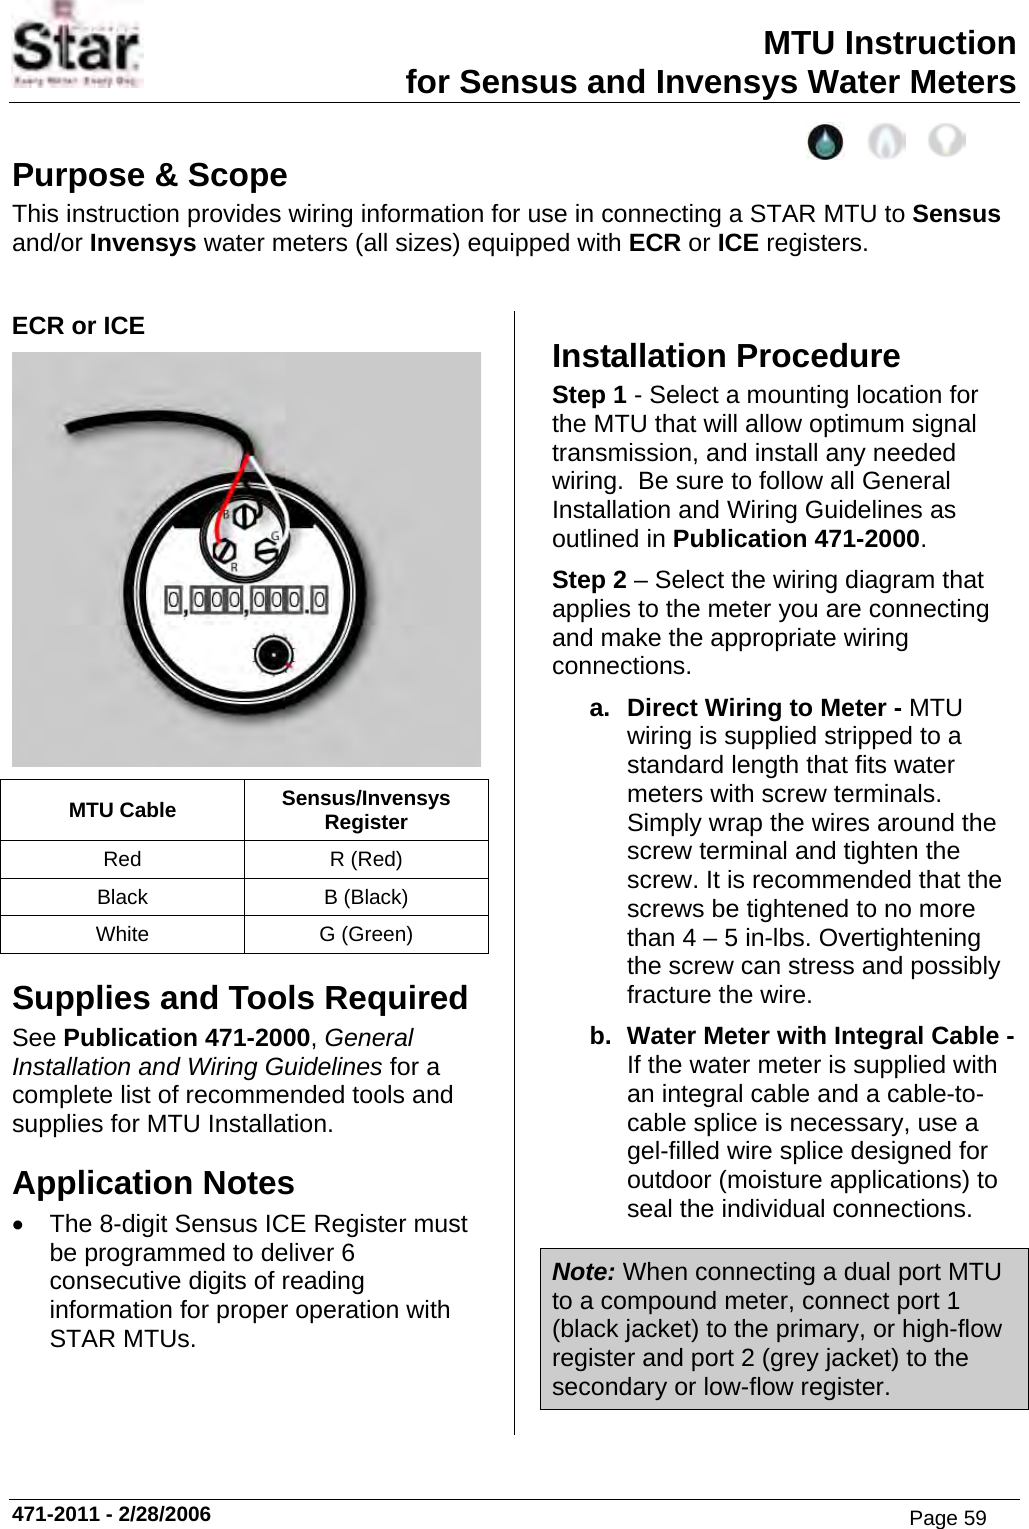 MTU Instruction for Sensus and Invensys Water Meters Purpose &amp; Scope This instruction provides wiring information for use in connecting a STAR MTU to Sensus and/or Invensys water meters (all sizes) equipped with ECR or ICE registers.  ECR or ICE  MTU Cable  Sensus/Invensys Register Red R (Red) Black B (Black) White G (Green) Supplies and Tools Required See Publication 471-2000, General Installation and Wiring Guidelines for a complete list of recommended tools and supplies for MTU Installation. Application Notes •  The 8-digit Sensus ICE Register must be programmed to deliver 6 consecutive digits of reading information for proper operation with STAR MTUs. Installation Procedure Step 1 - Select a mounting location for the MTU that will allow optimum signal transmission, and install any needed wiring.  Be sure to follow all General Installation and Wiring Guidelines as outlined in Publication 471-2000. Step 2 – Select the wiring diagram that applies to the meter you are connecting and make the appropriate wiring connections. a.  Direct Wiring to Meter - MTU wiring is supplied stripped to a standard length that fits water meters with screw terminals. Simply wrap the wires around the screw terminal and tighten the screw. It is recommended that the screws be tightened to no more than 4 – 5 in-lbs. Overtightening the screw can stress and possibly fracture the wire. b.  Water Meter with Integral Cable - If the water meter is supplied with an integral cable and a cable-to-cable splice is necessary, use a gel-filled wire splice designed for outdoor (moisture applications) to seal the individual connections. Note: When connecting a dual port MTU to a compound meter, connect port 1 (black jacket) to the primary, or high-flow register and port 2 (grey jacket) to the secondary or low-flow register. 471-2011 - 2/28/2006 Page 59